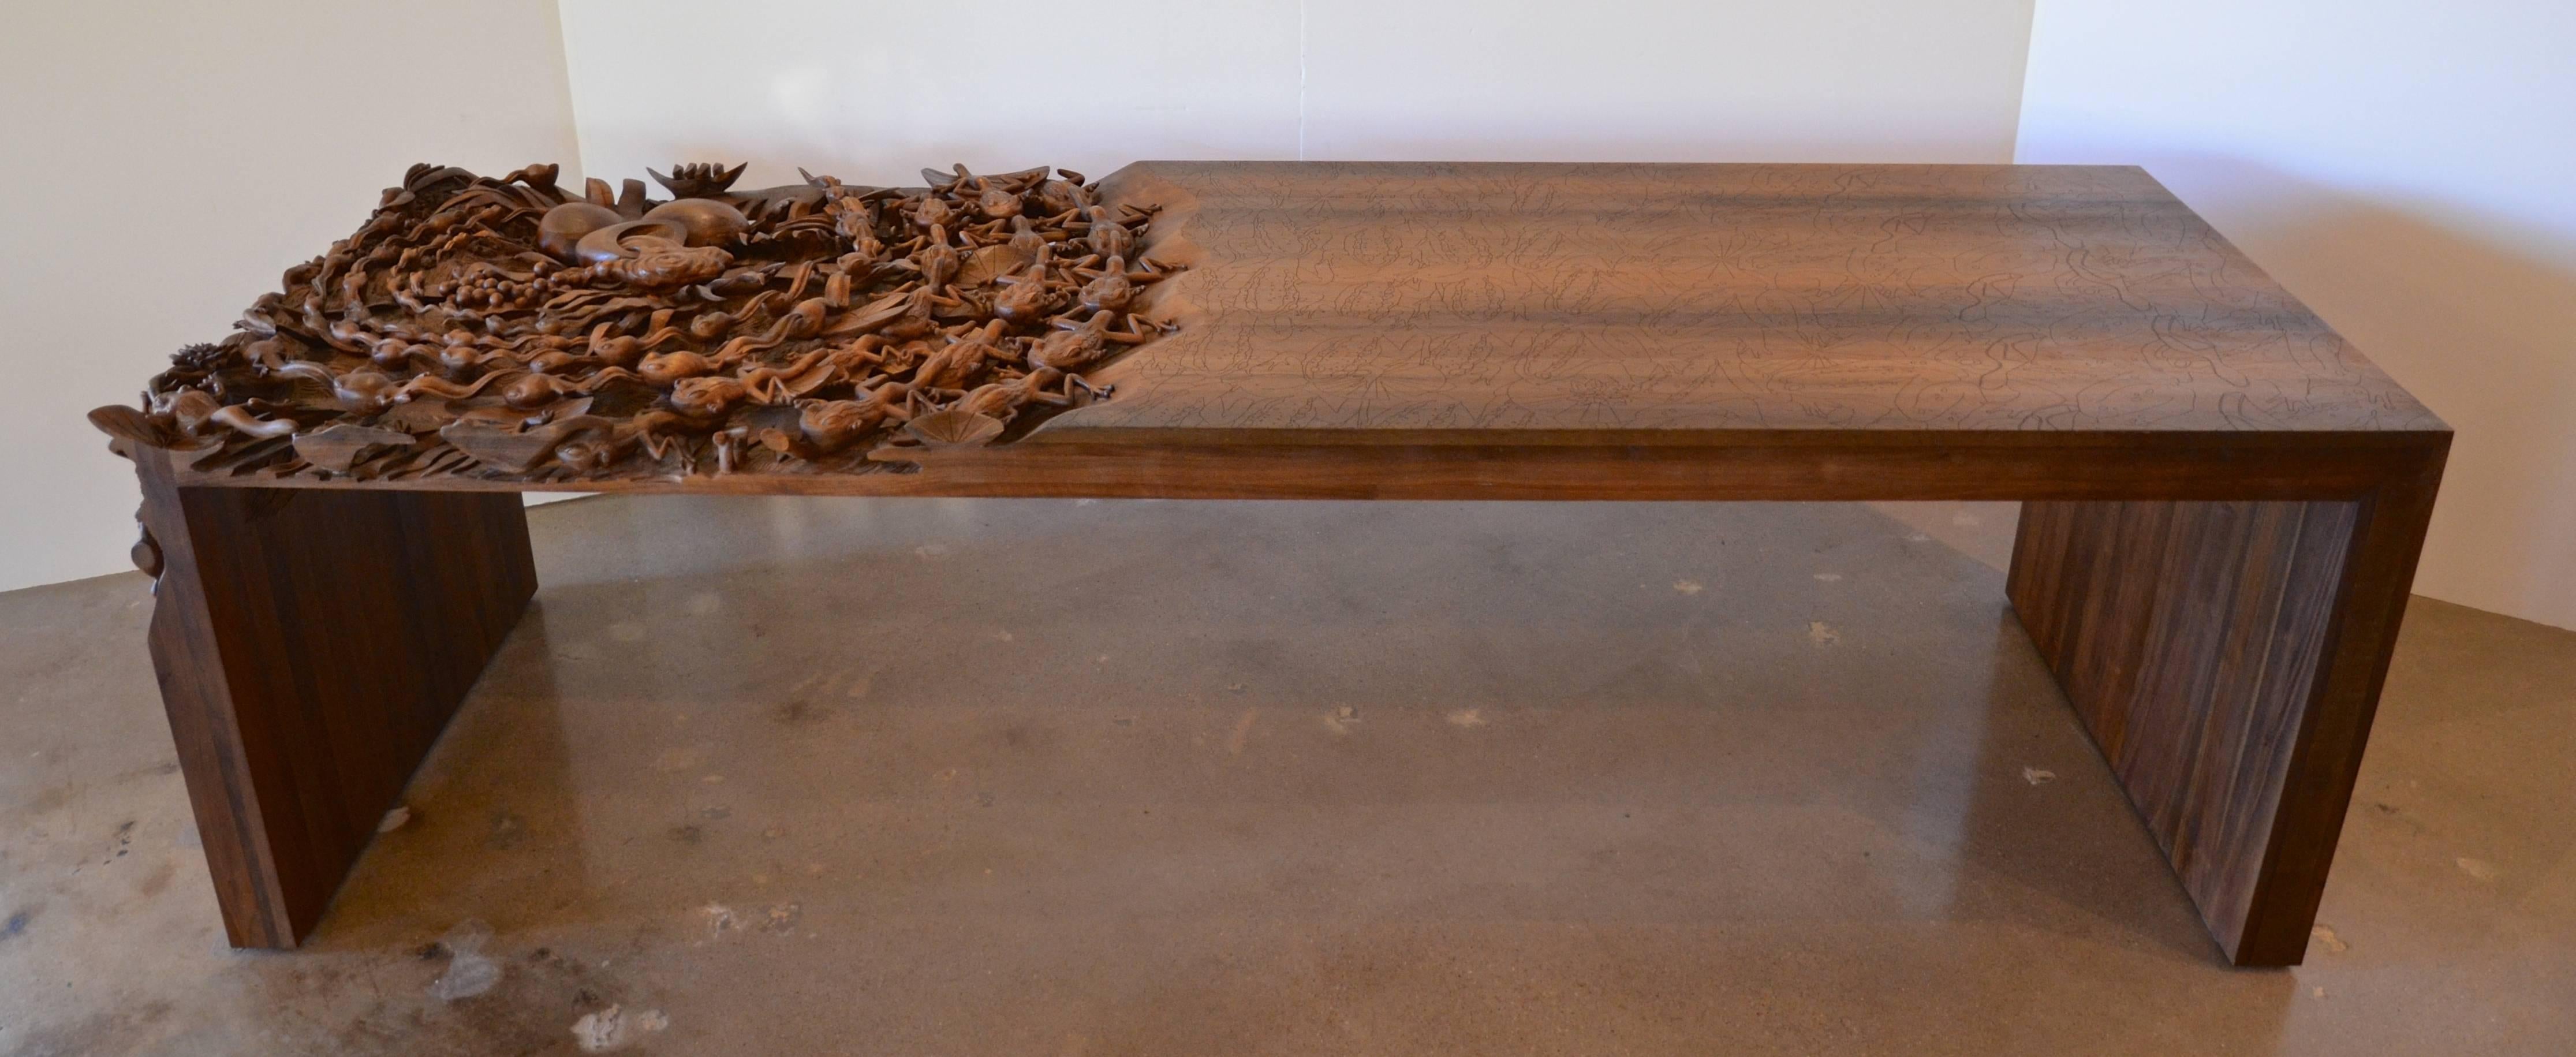 An extraordinary contemporary sculpture and table of American walnut. The table reveals, with intricate layers of hand carving, the story of the Indonesian folk tale of a frog that turns into a prince. Only five tables were created with one now